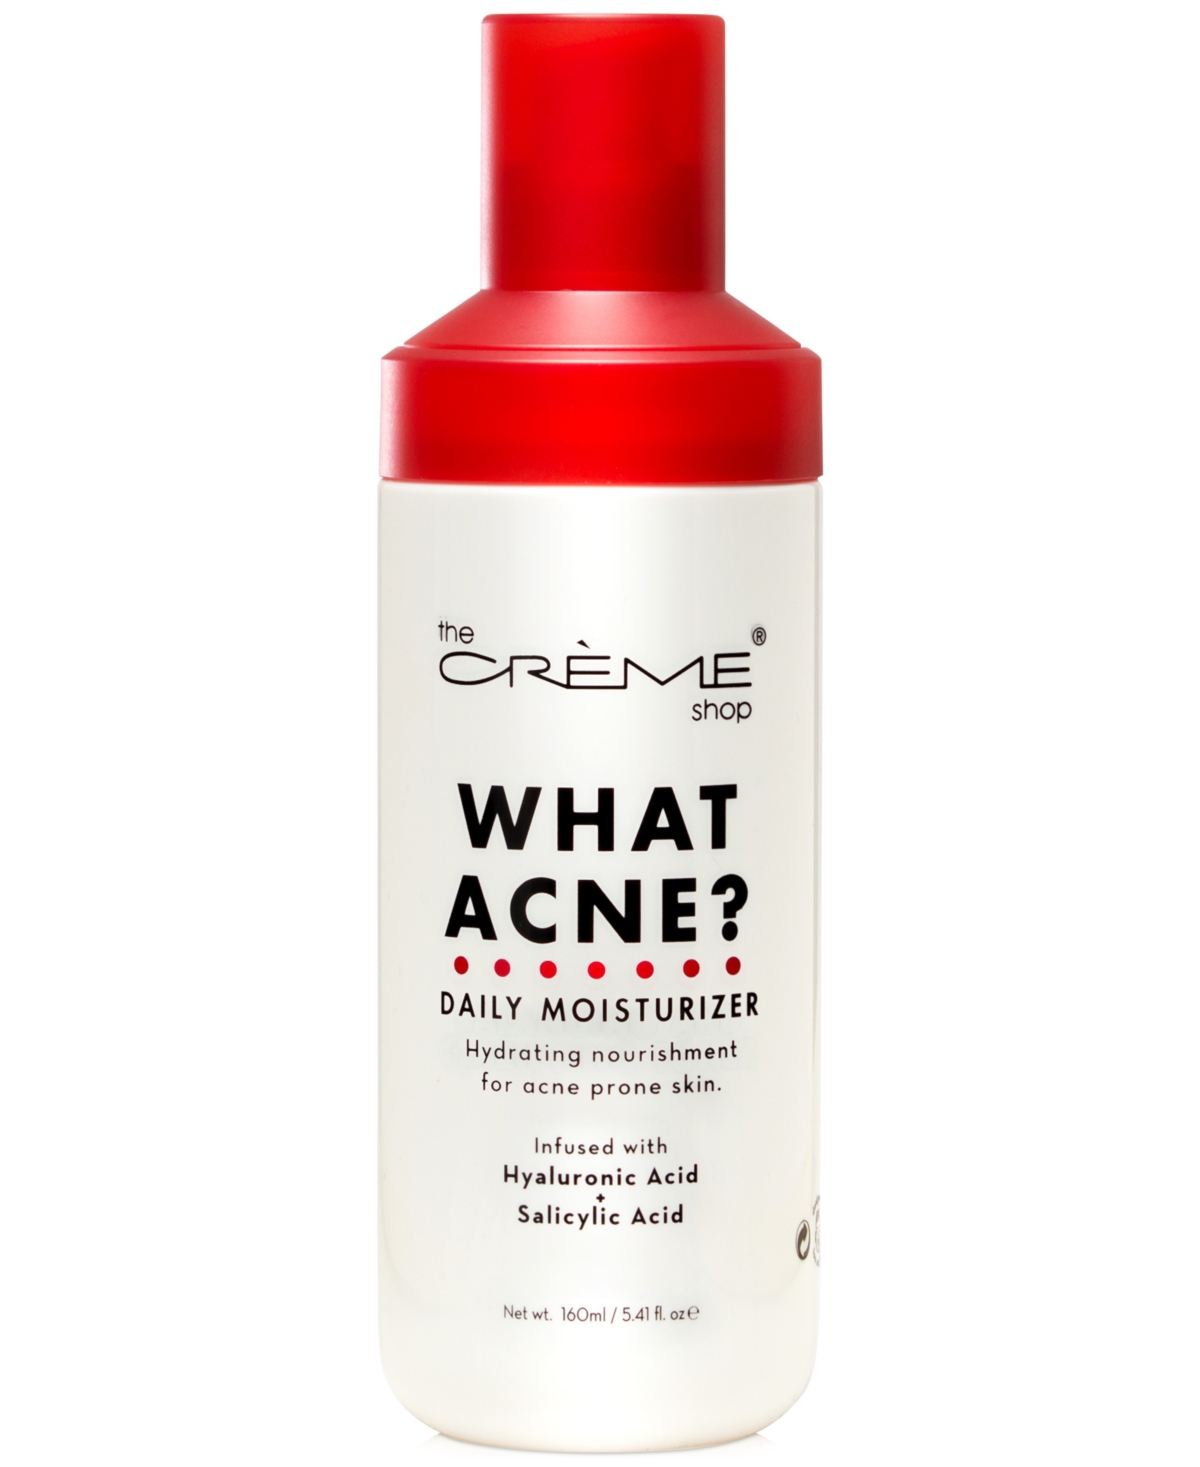 What Acne? Daily Moisturizer